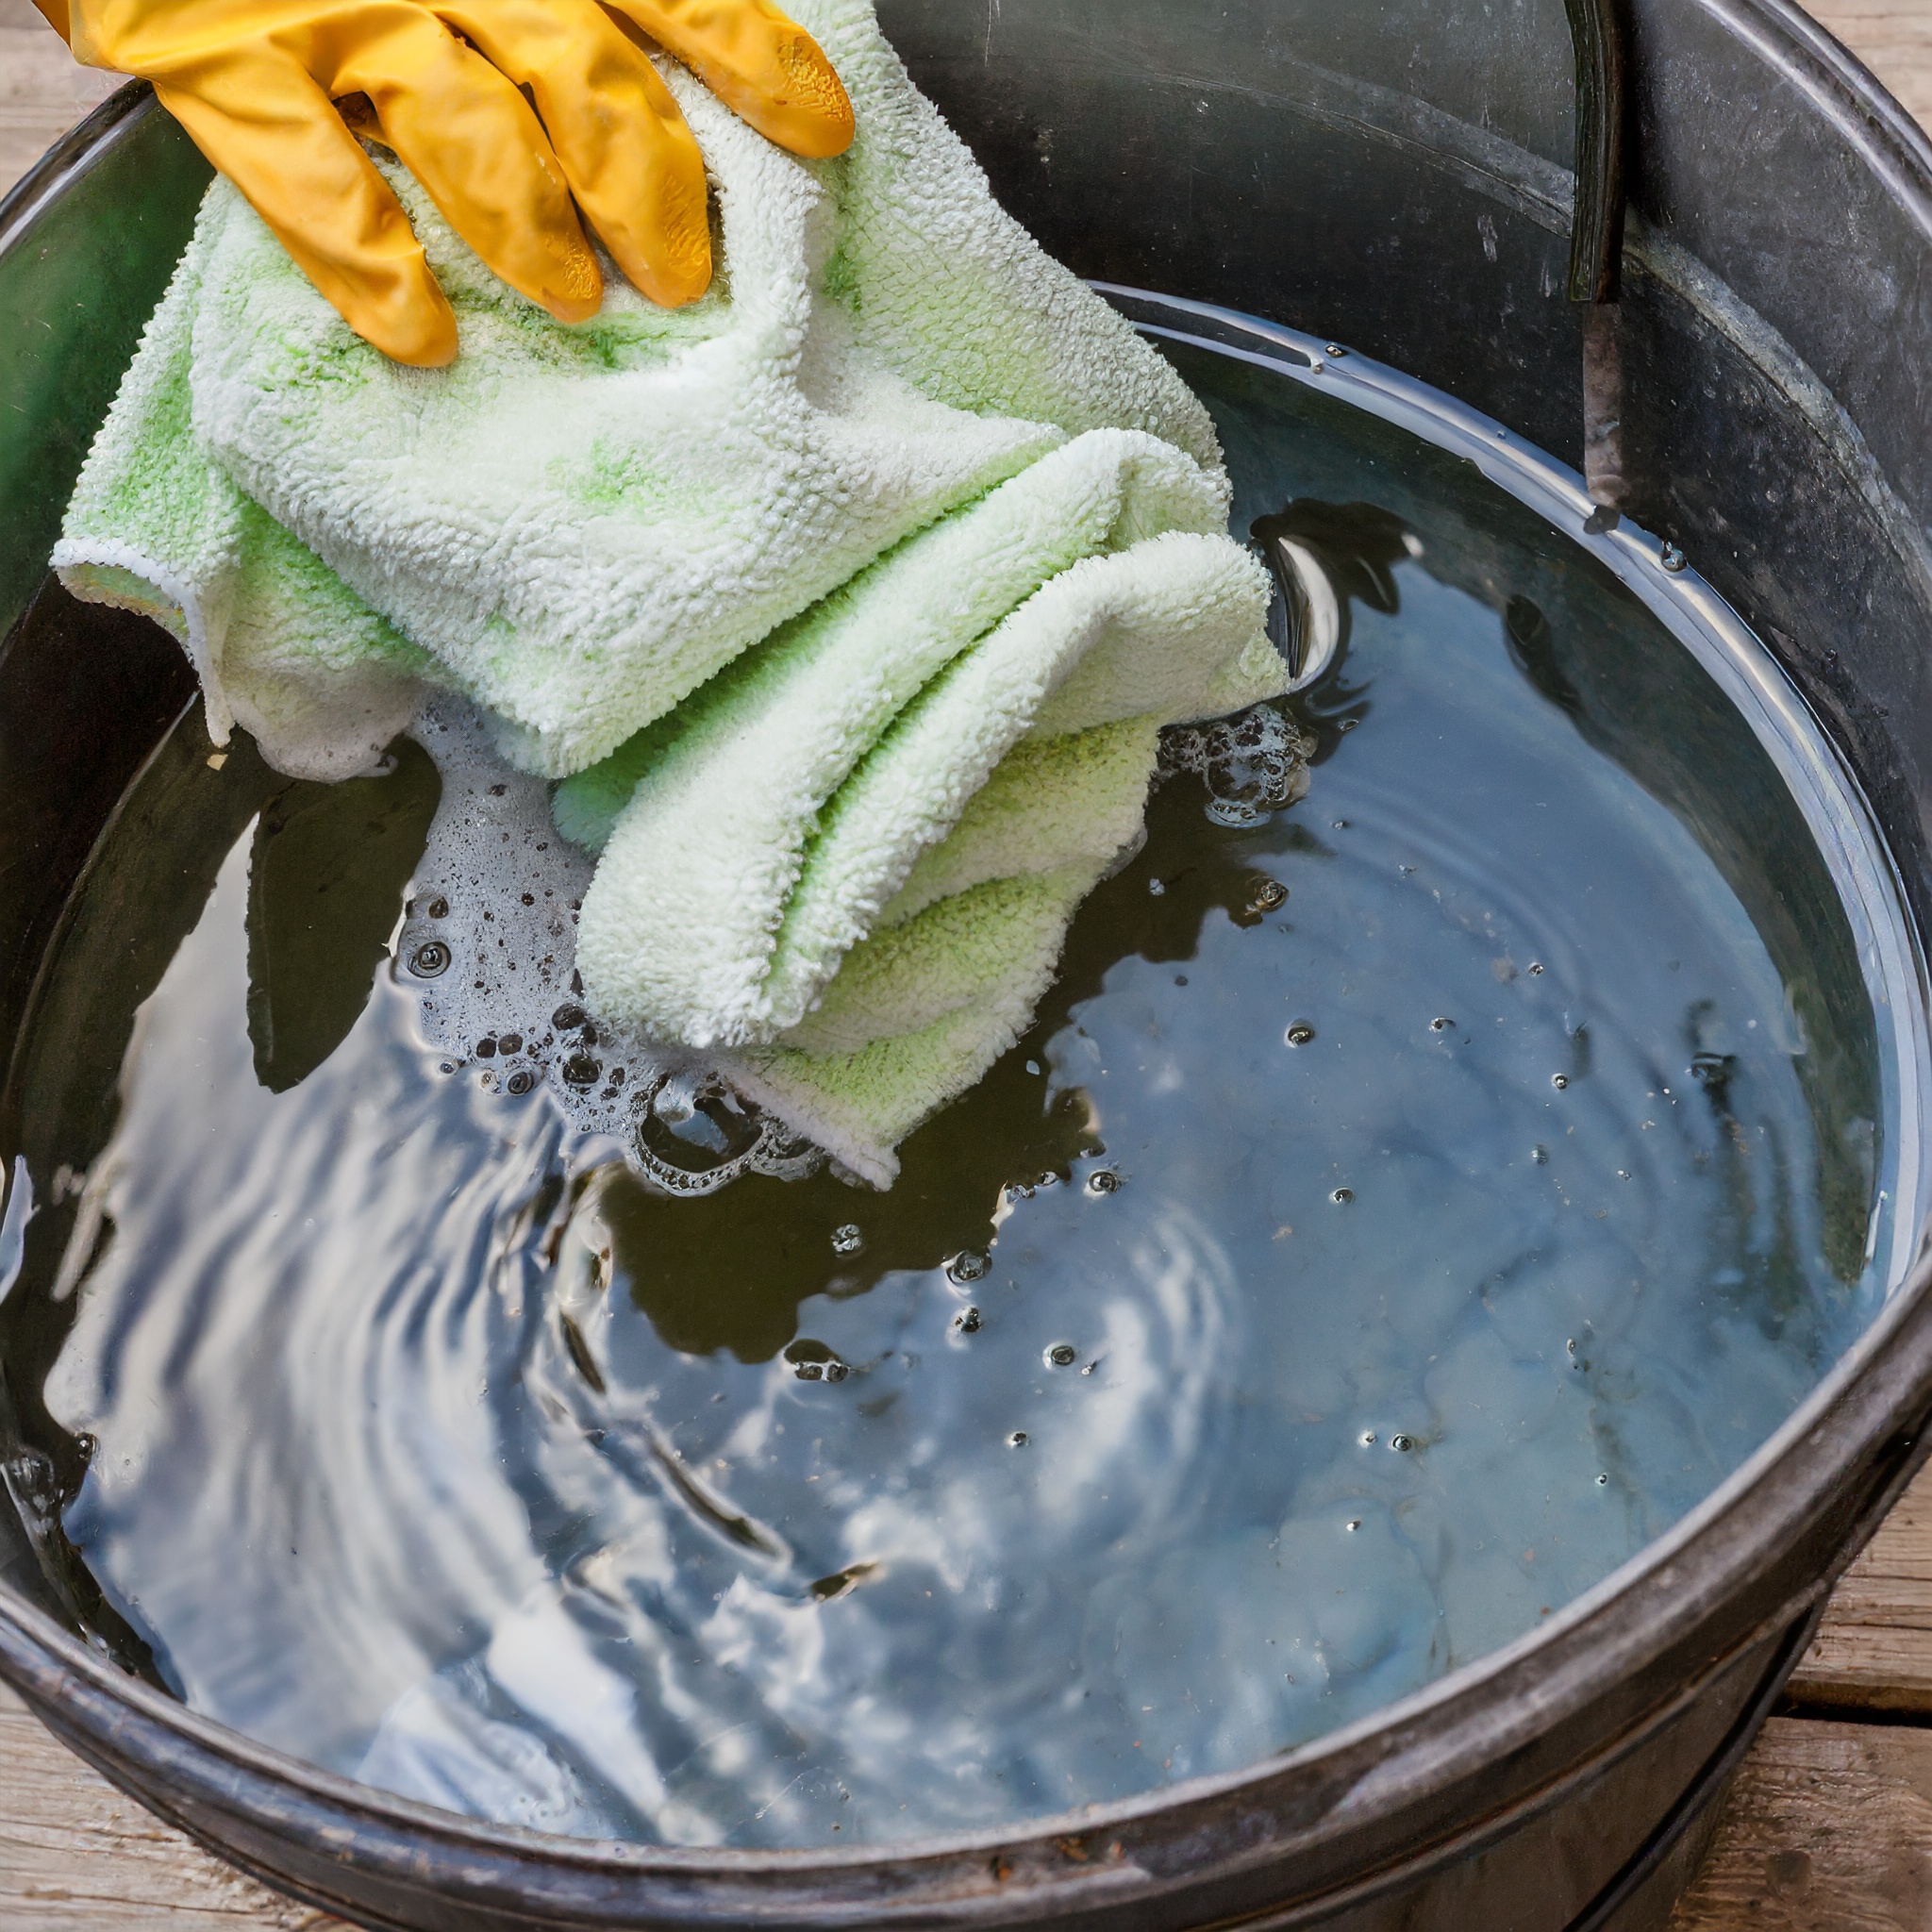 Firefly Cleaning rag in water on a bucket 37991